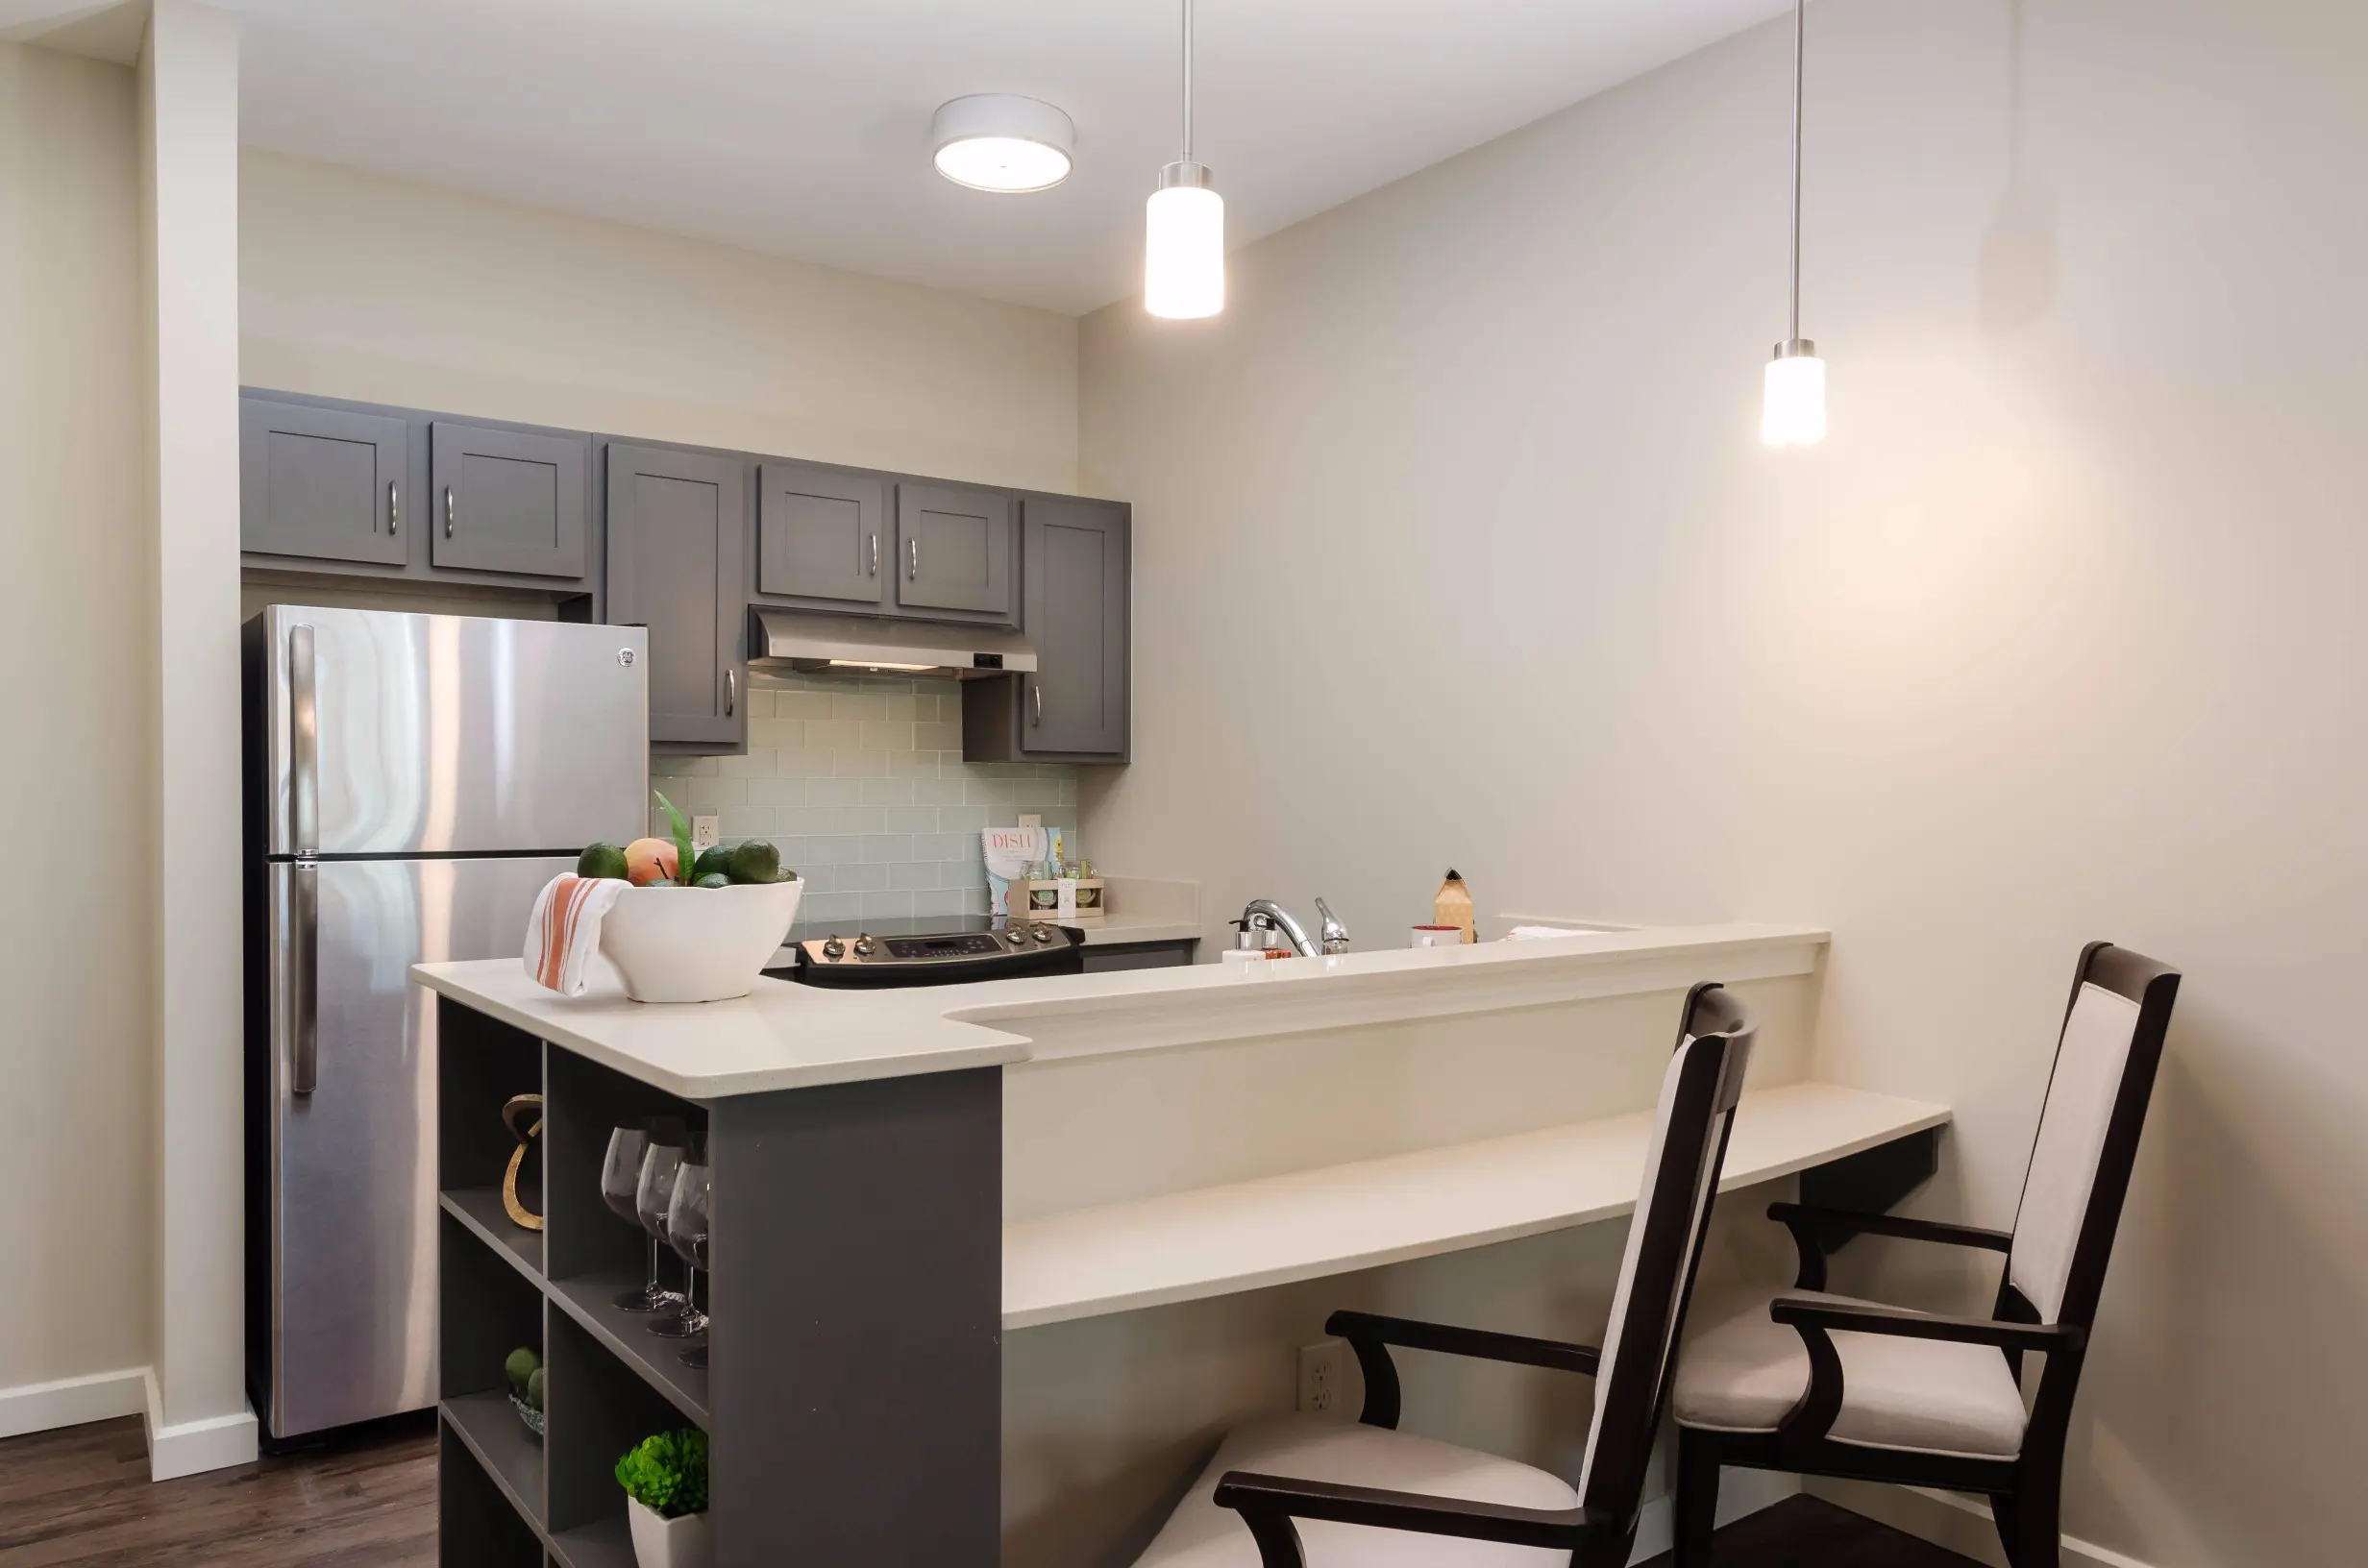 Kitchenette of a senior apartment at American House Coconut Point, a senior living community in Estero, FL